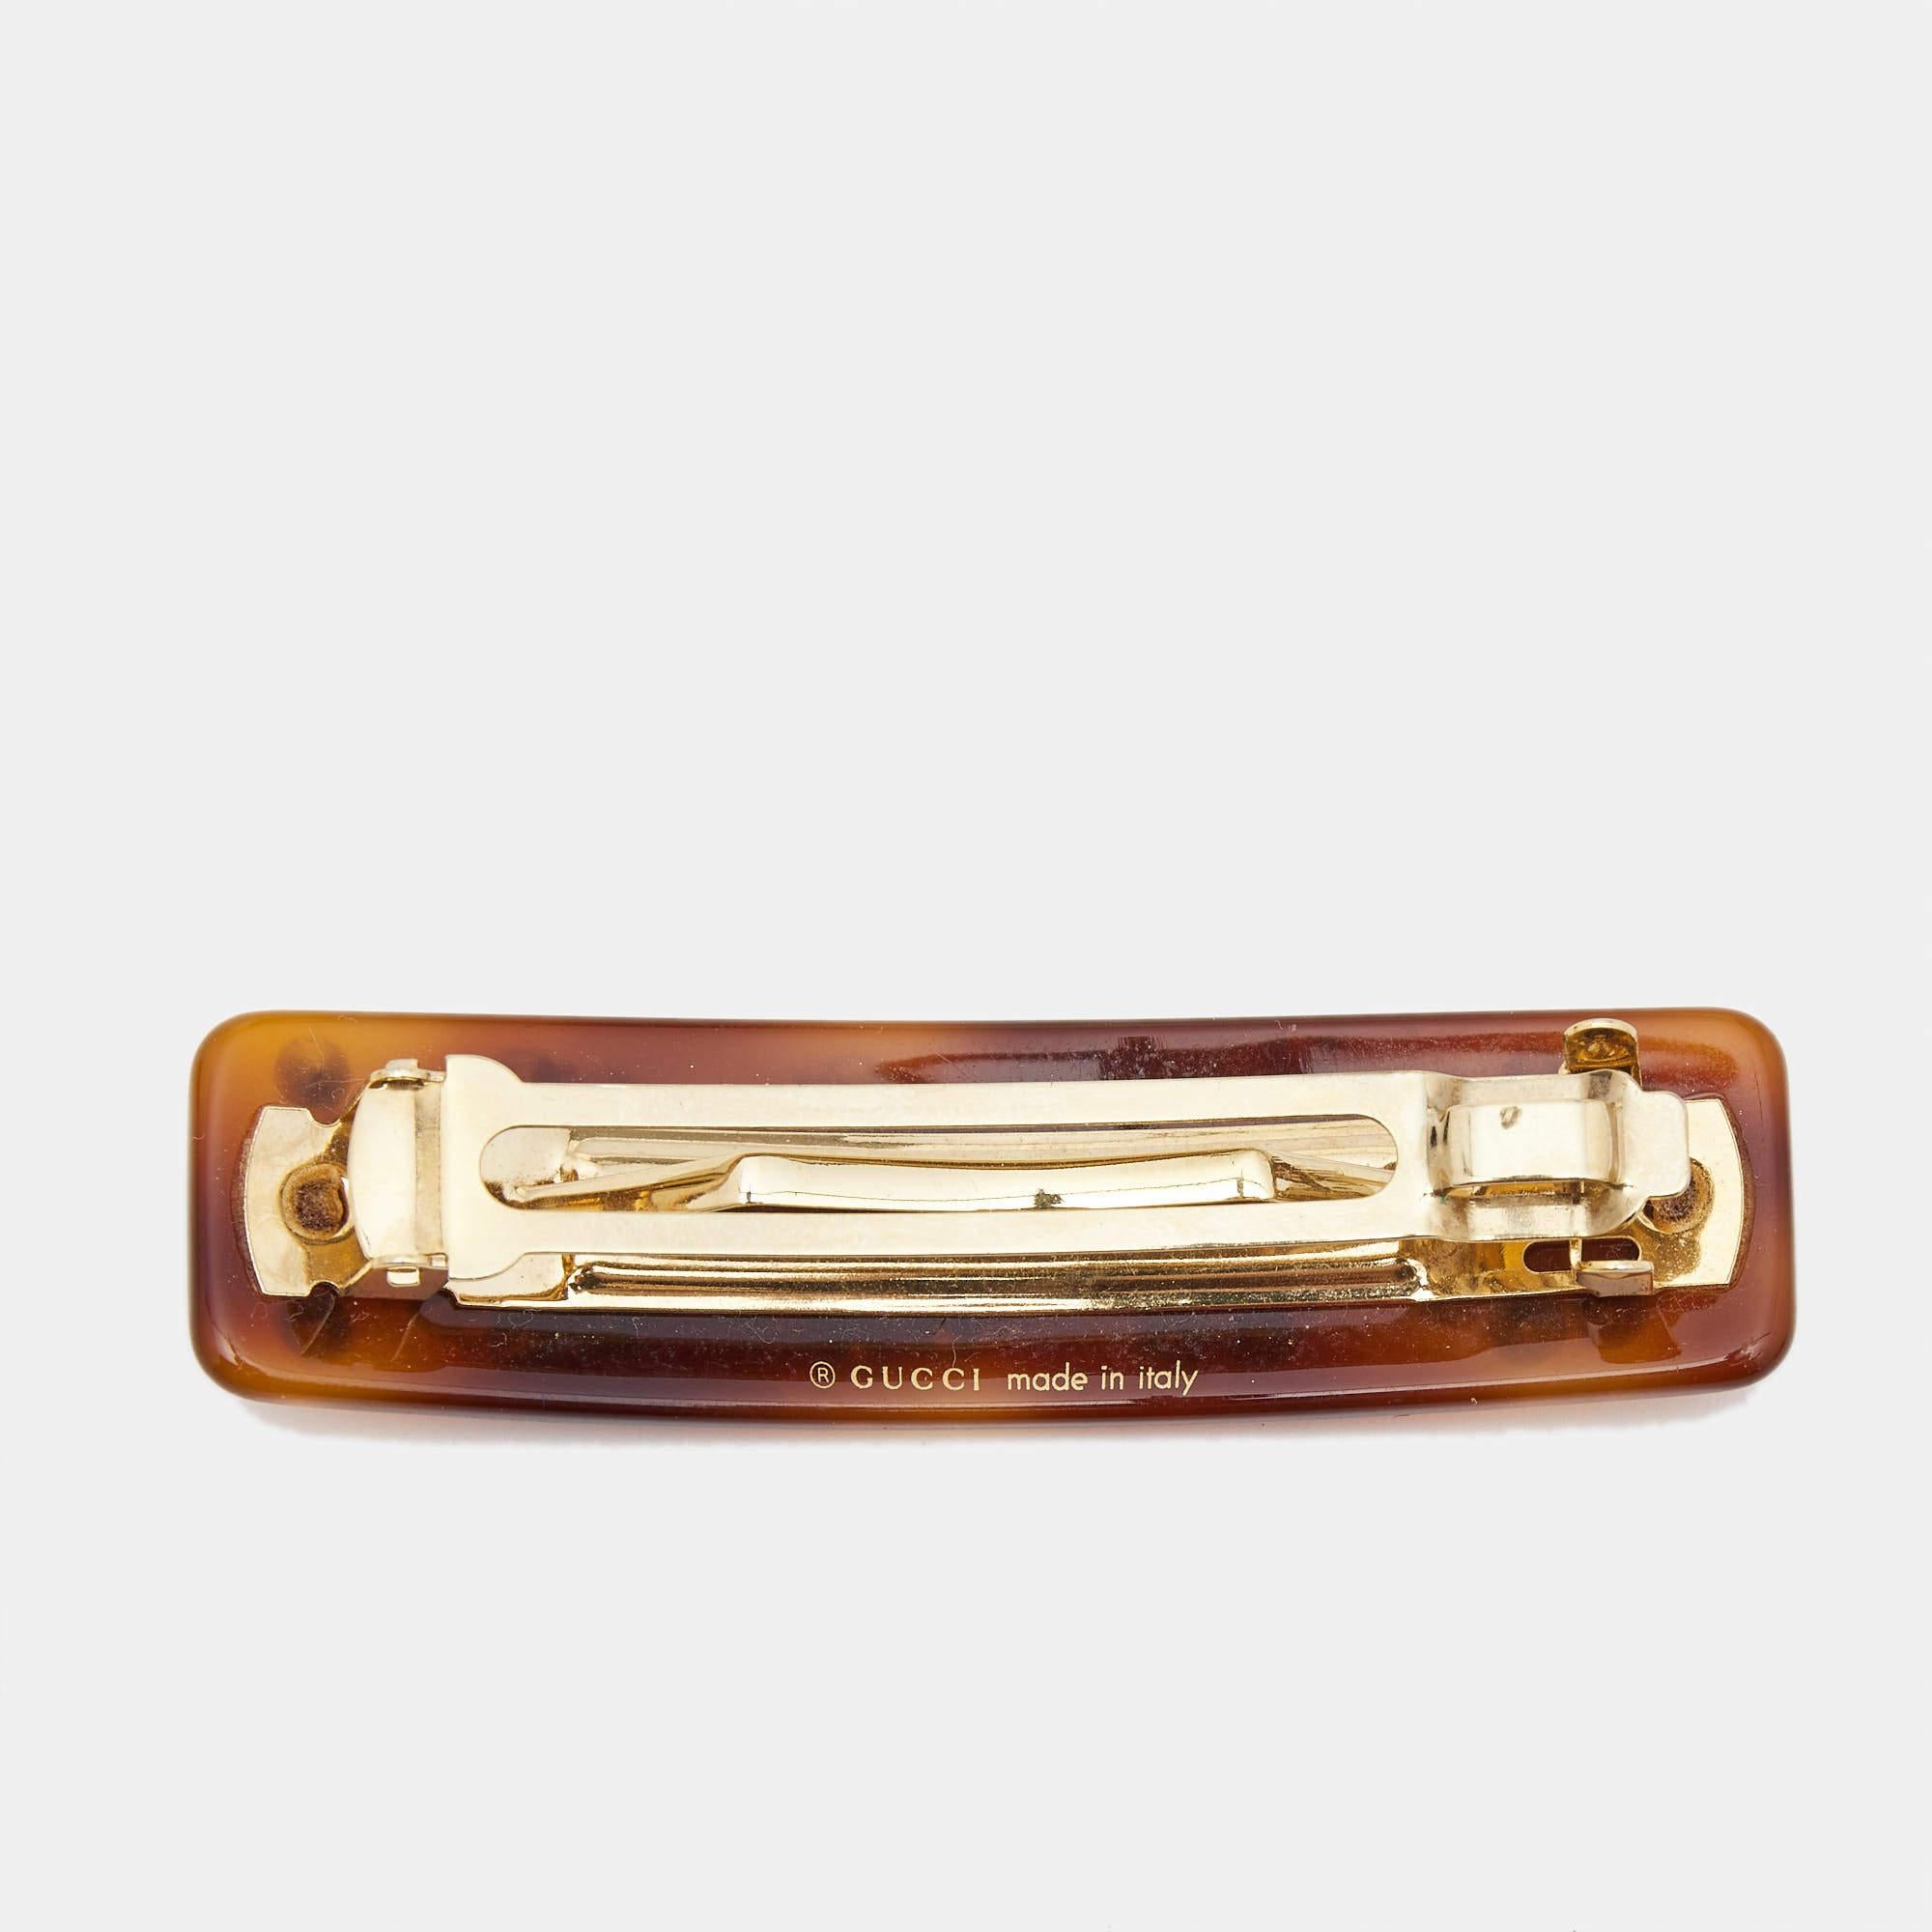 Sparkling crystals and the brand logo are set on resin to form this sweet Gucci hair clip. It has a simple gold-tone clasp at the back.

